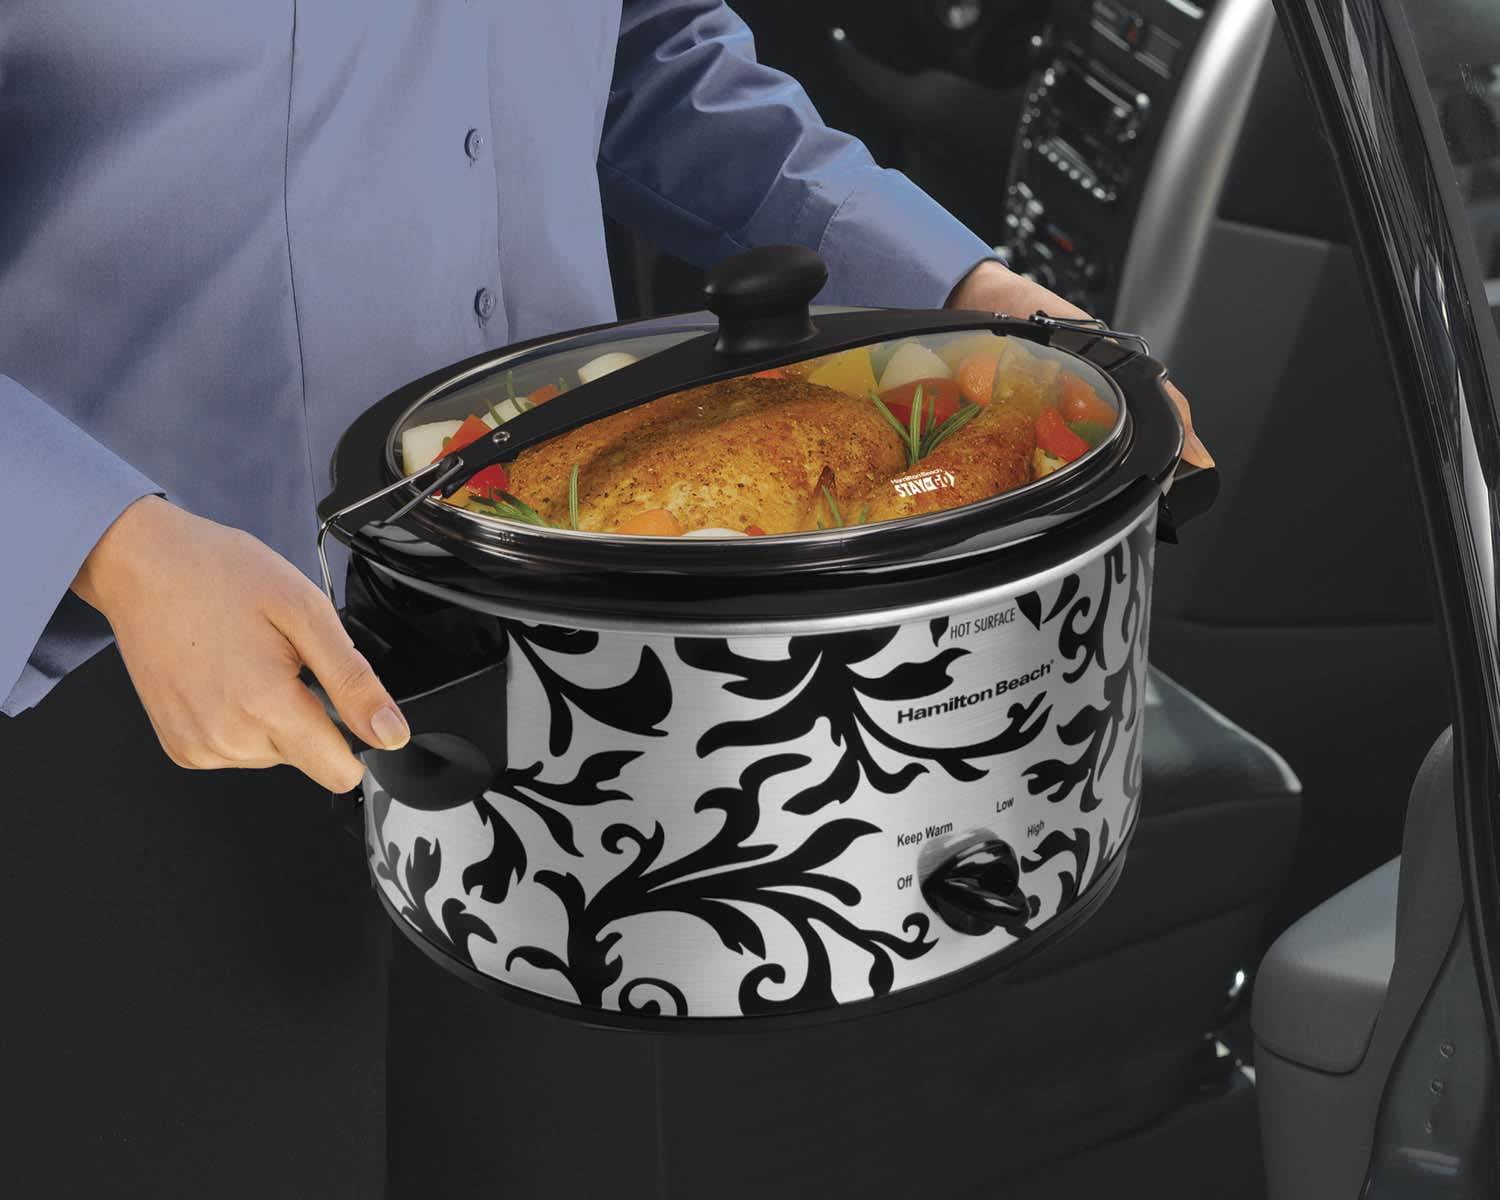 Stay or Go® 4 Quart Slow Cooker - 33245